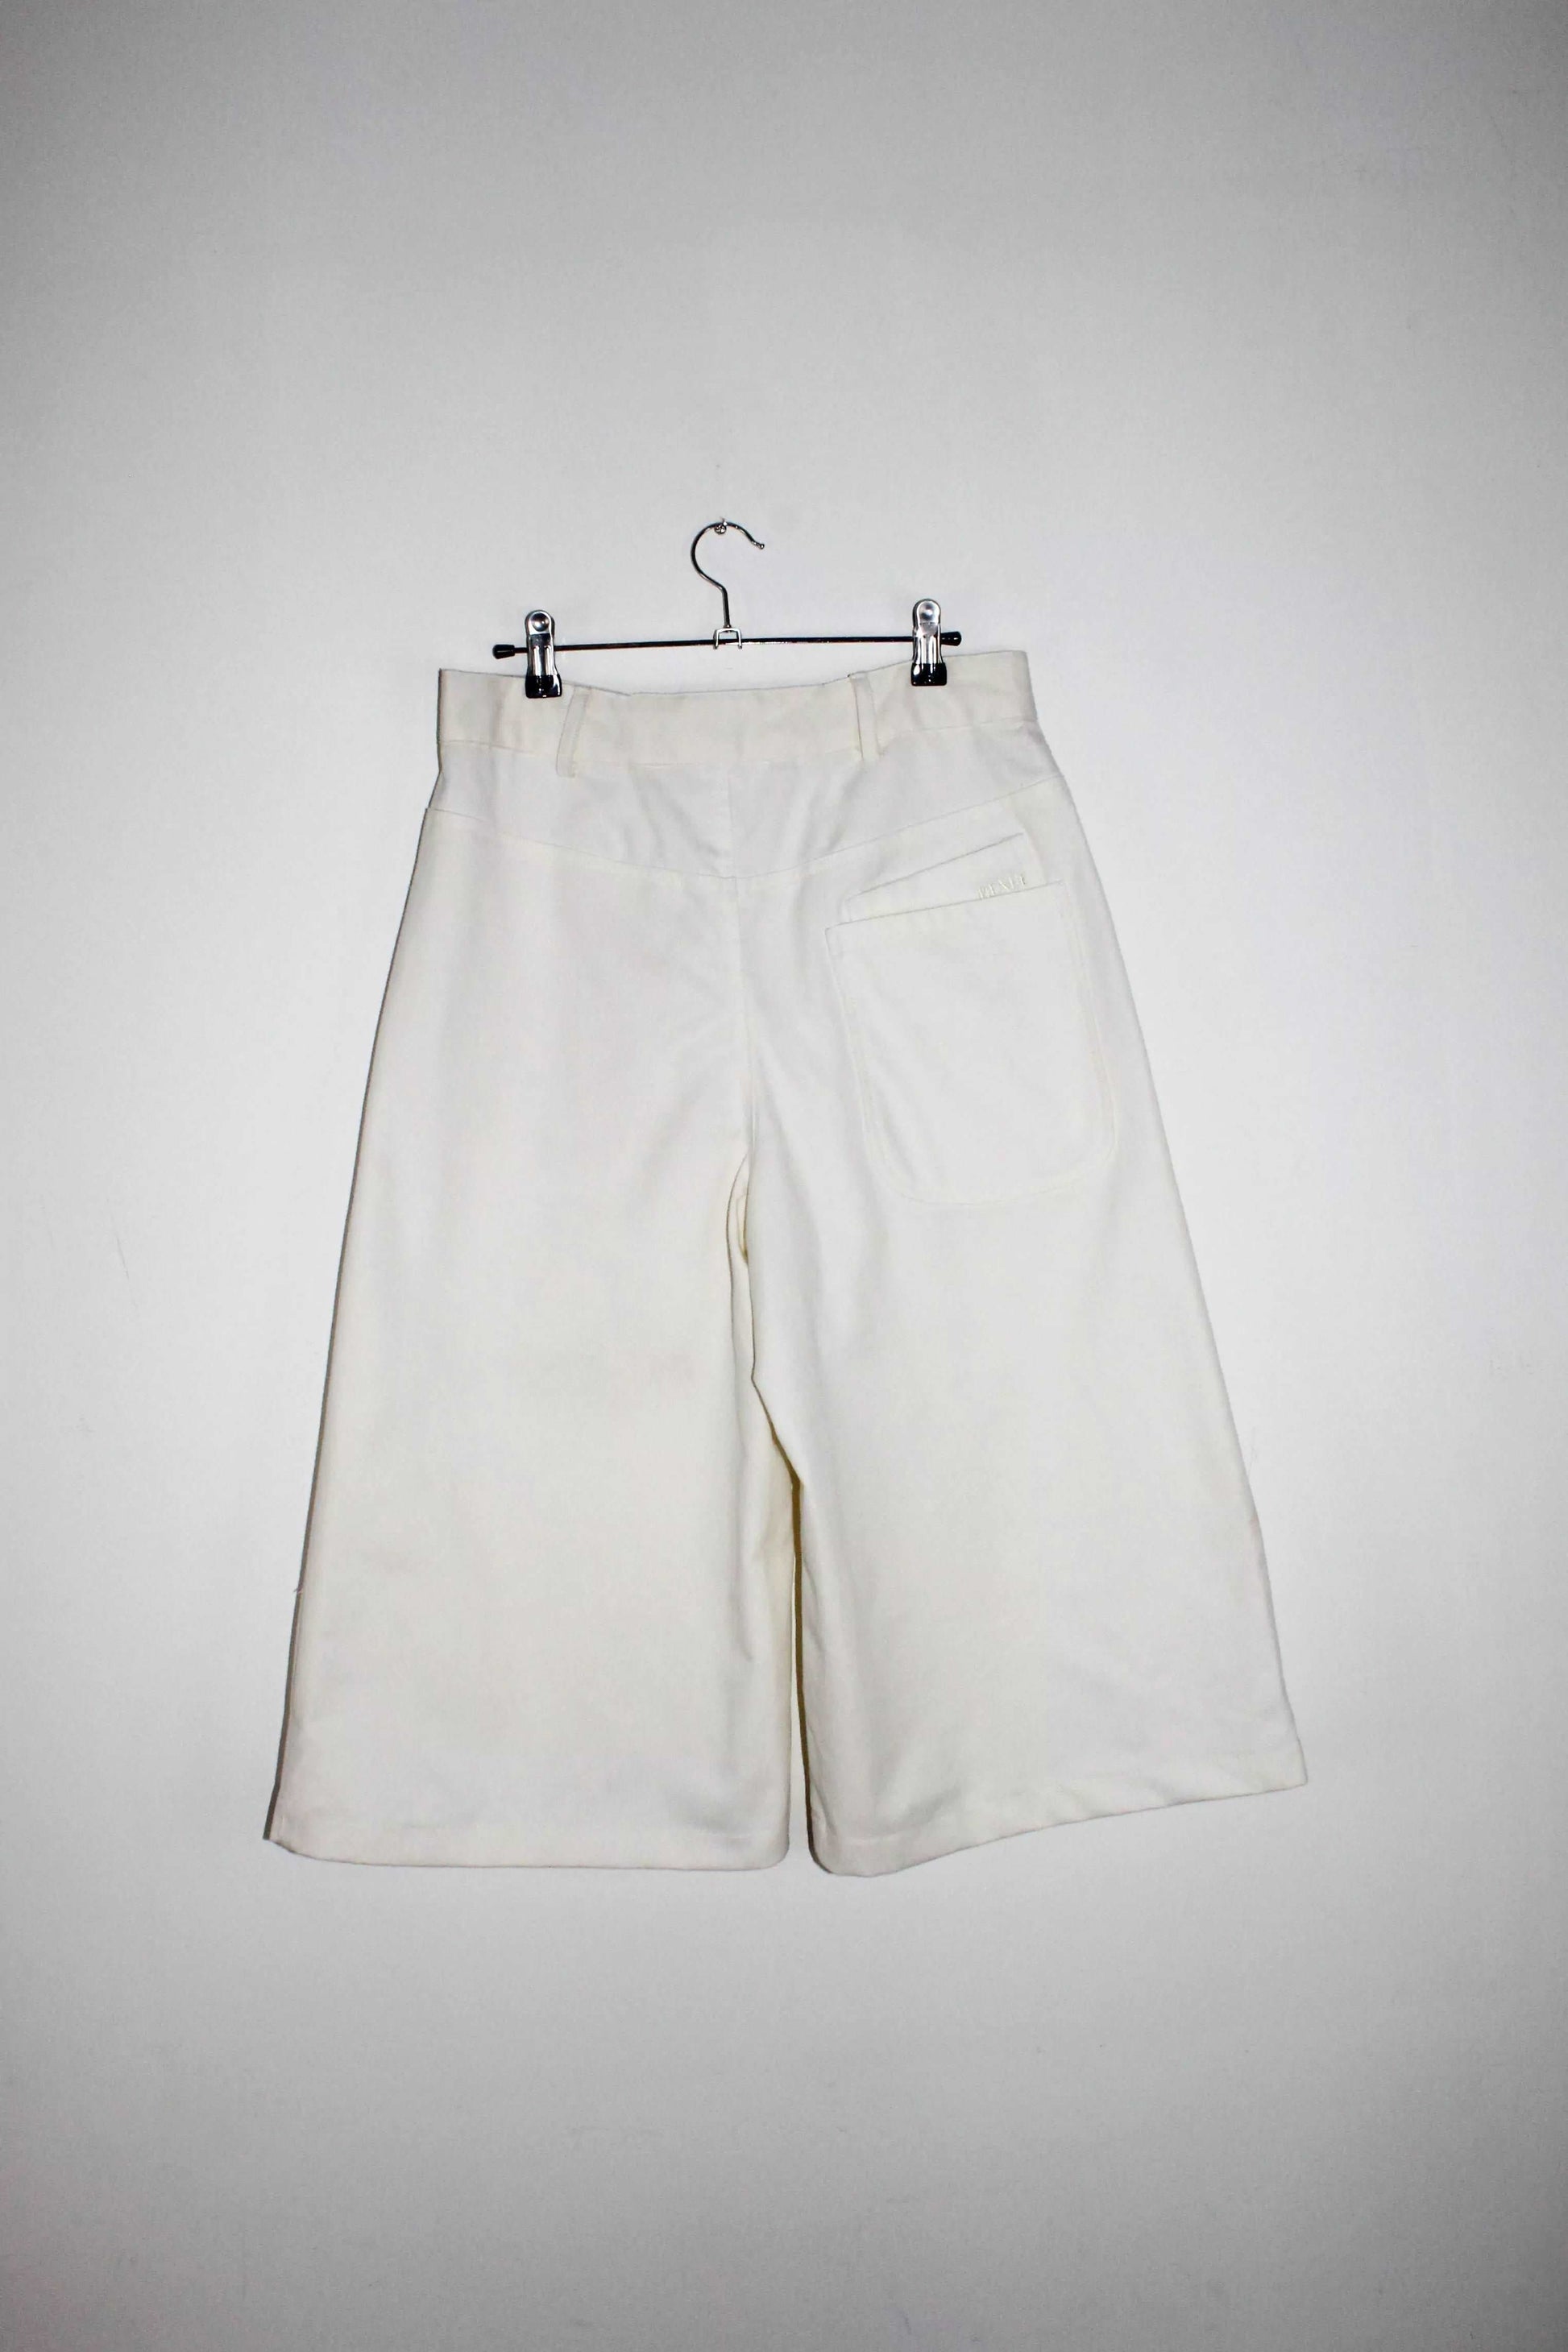 Back view lightweight long white denim shorts with removable screw buttons. Has fitted waist and 90s vintage details